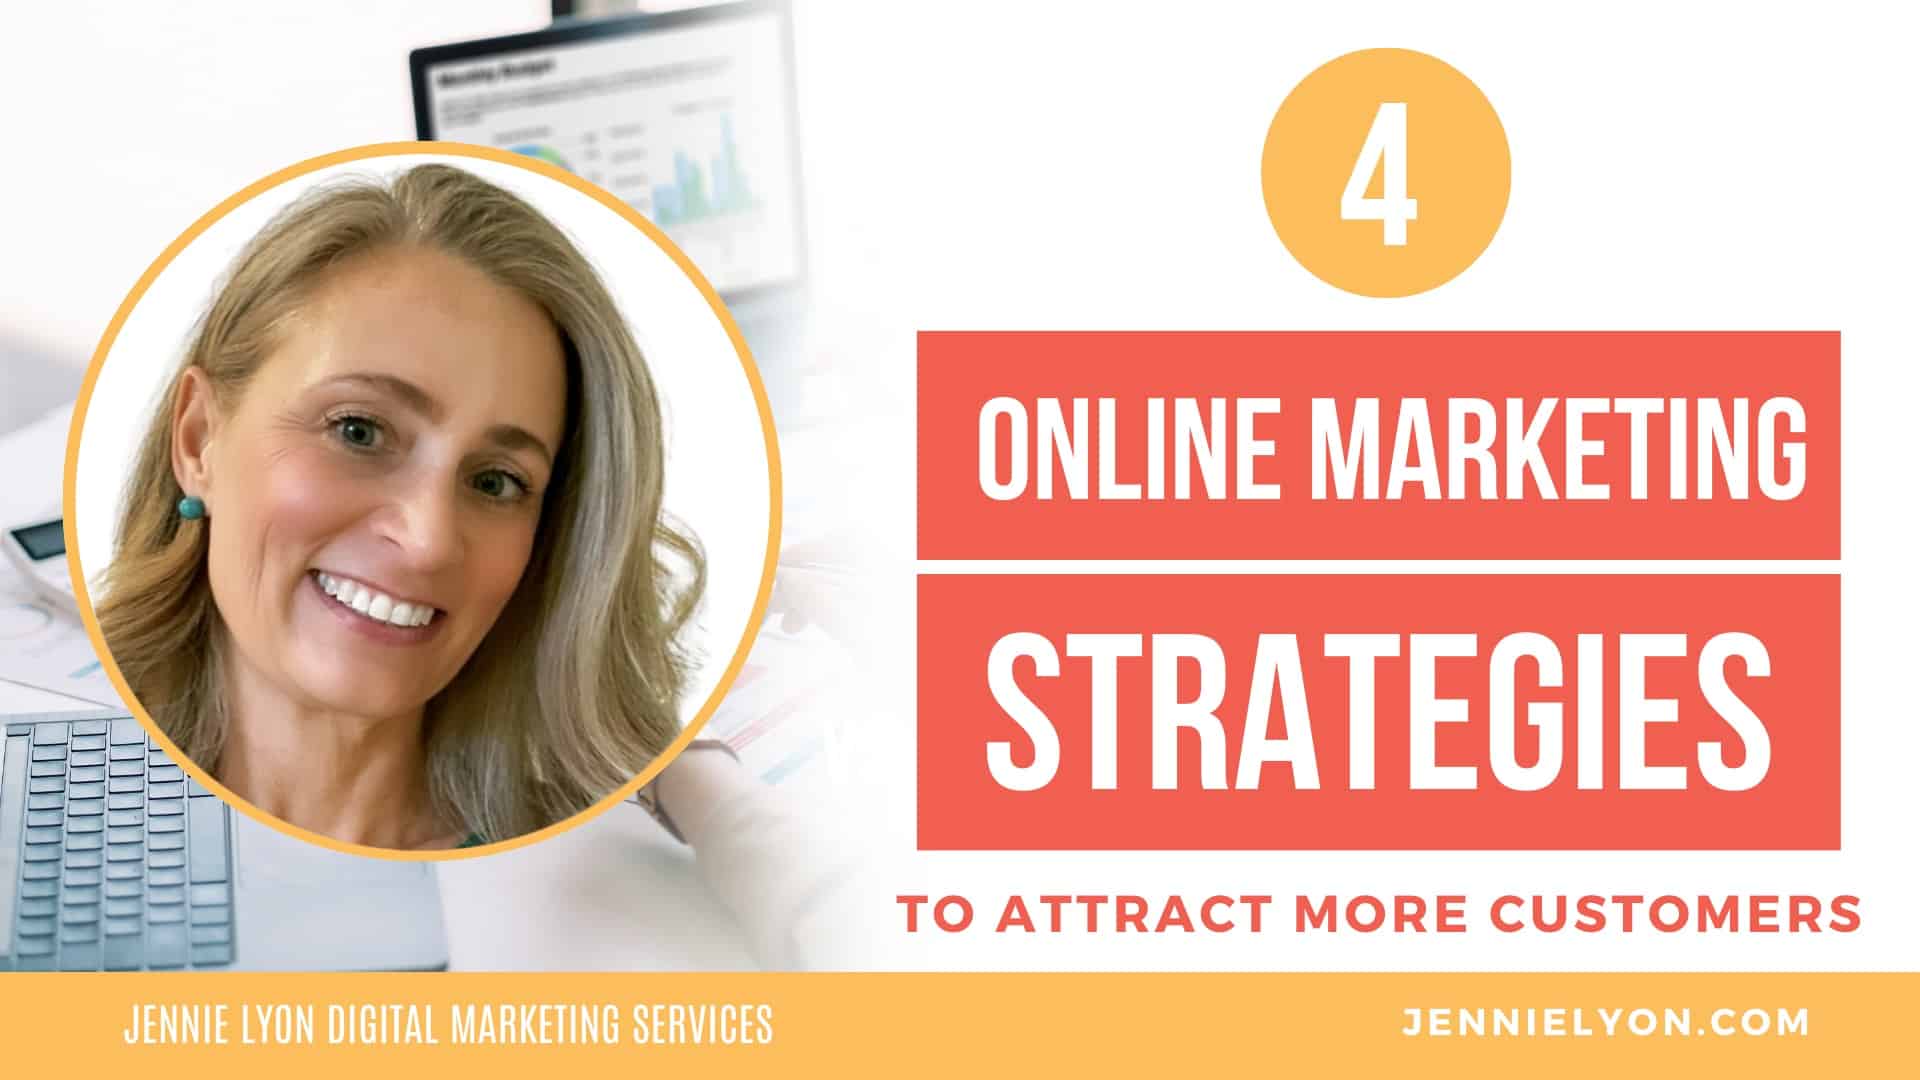 4 Simple Weekly Online Marketing Strategies to Attract More Customers